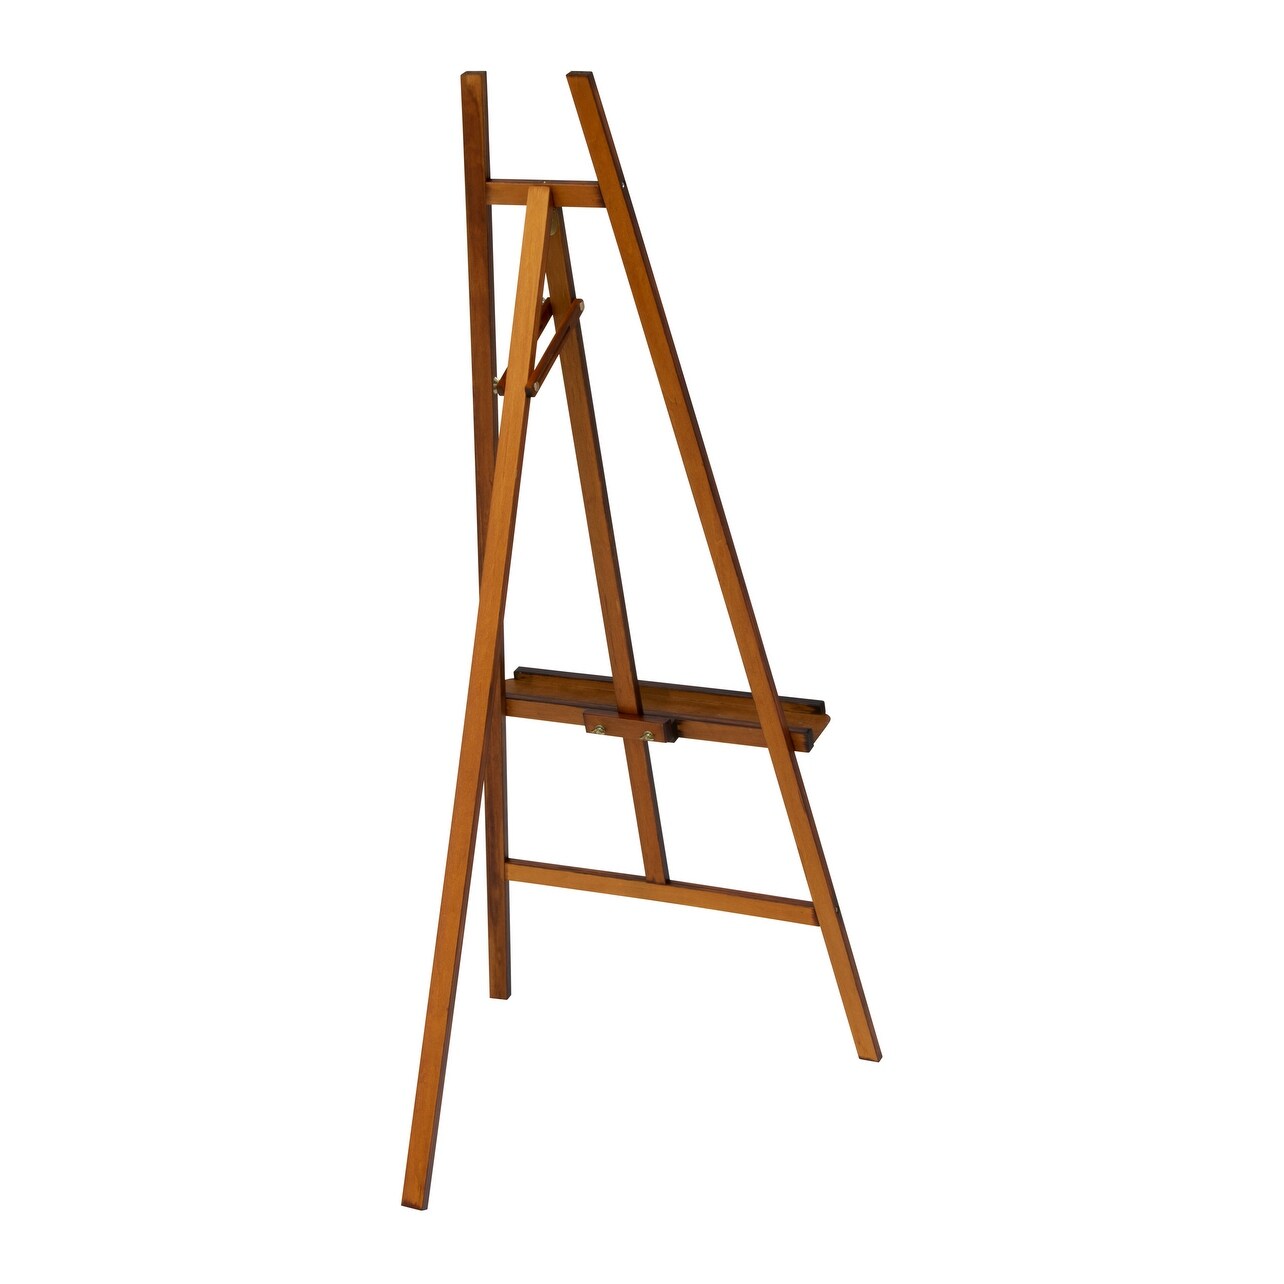 Heavy-Duty Metal Museum Lyre Artist Easel for Large Canvases